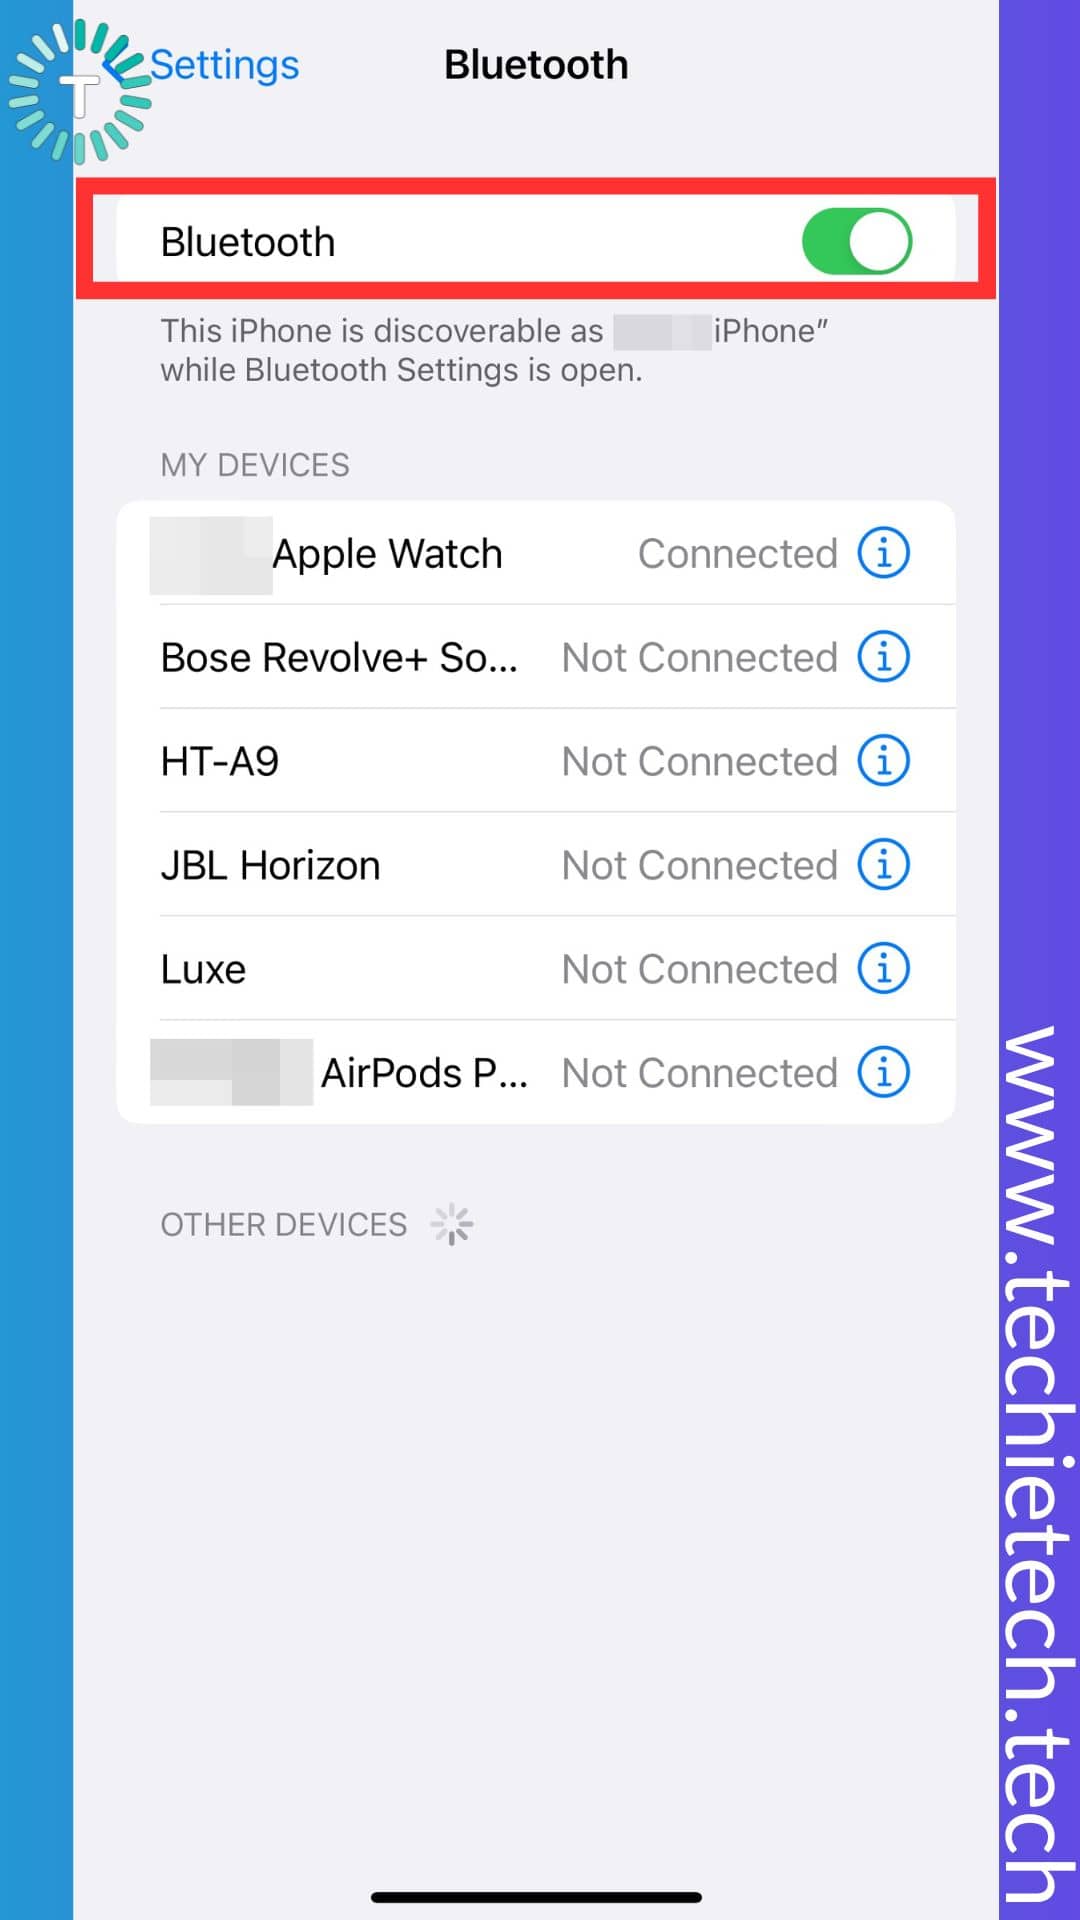 Toggle the switch to turn on Bluetooth